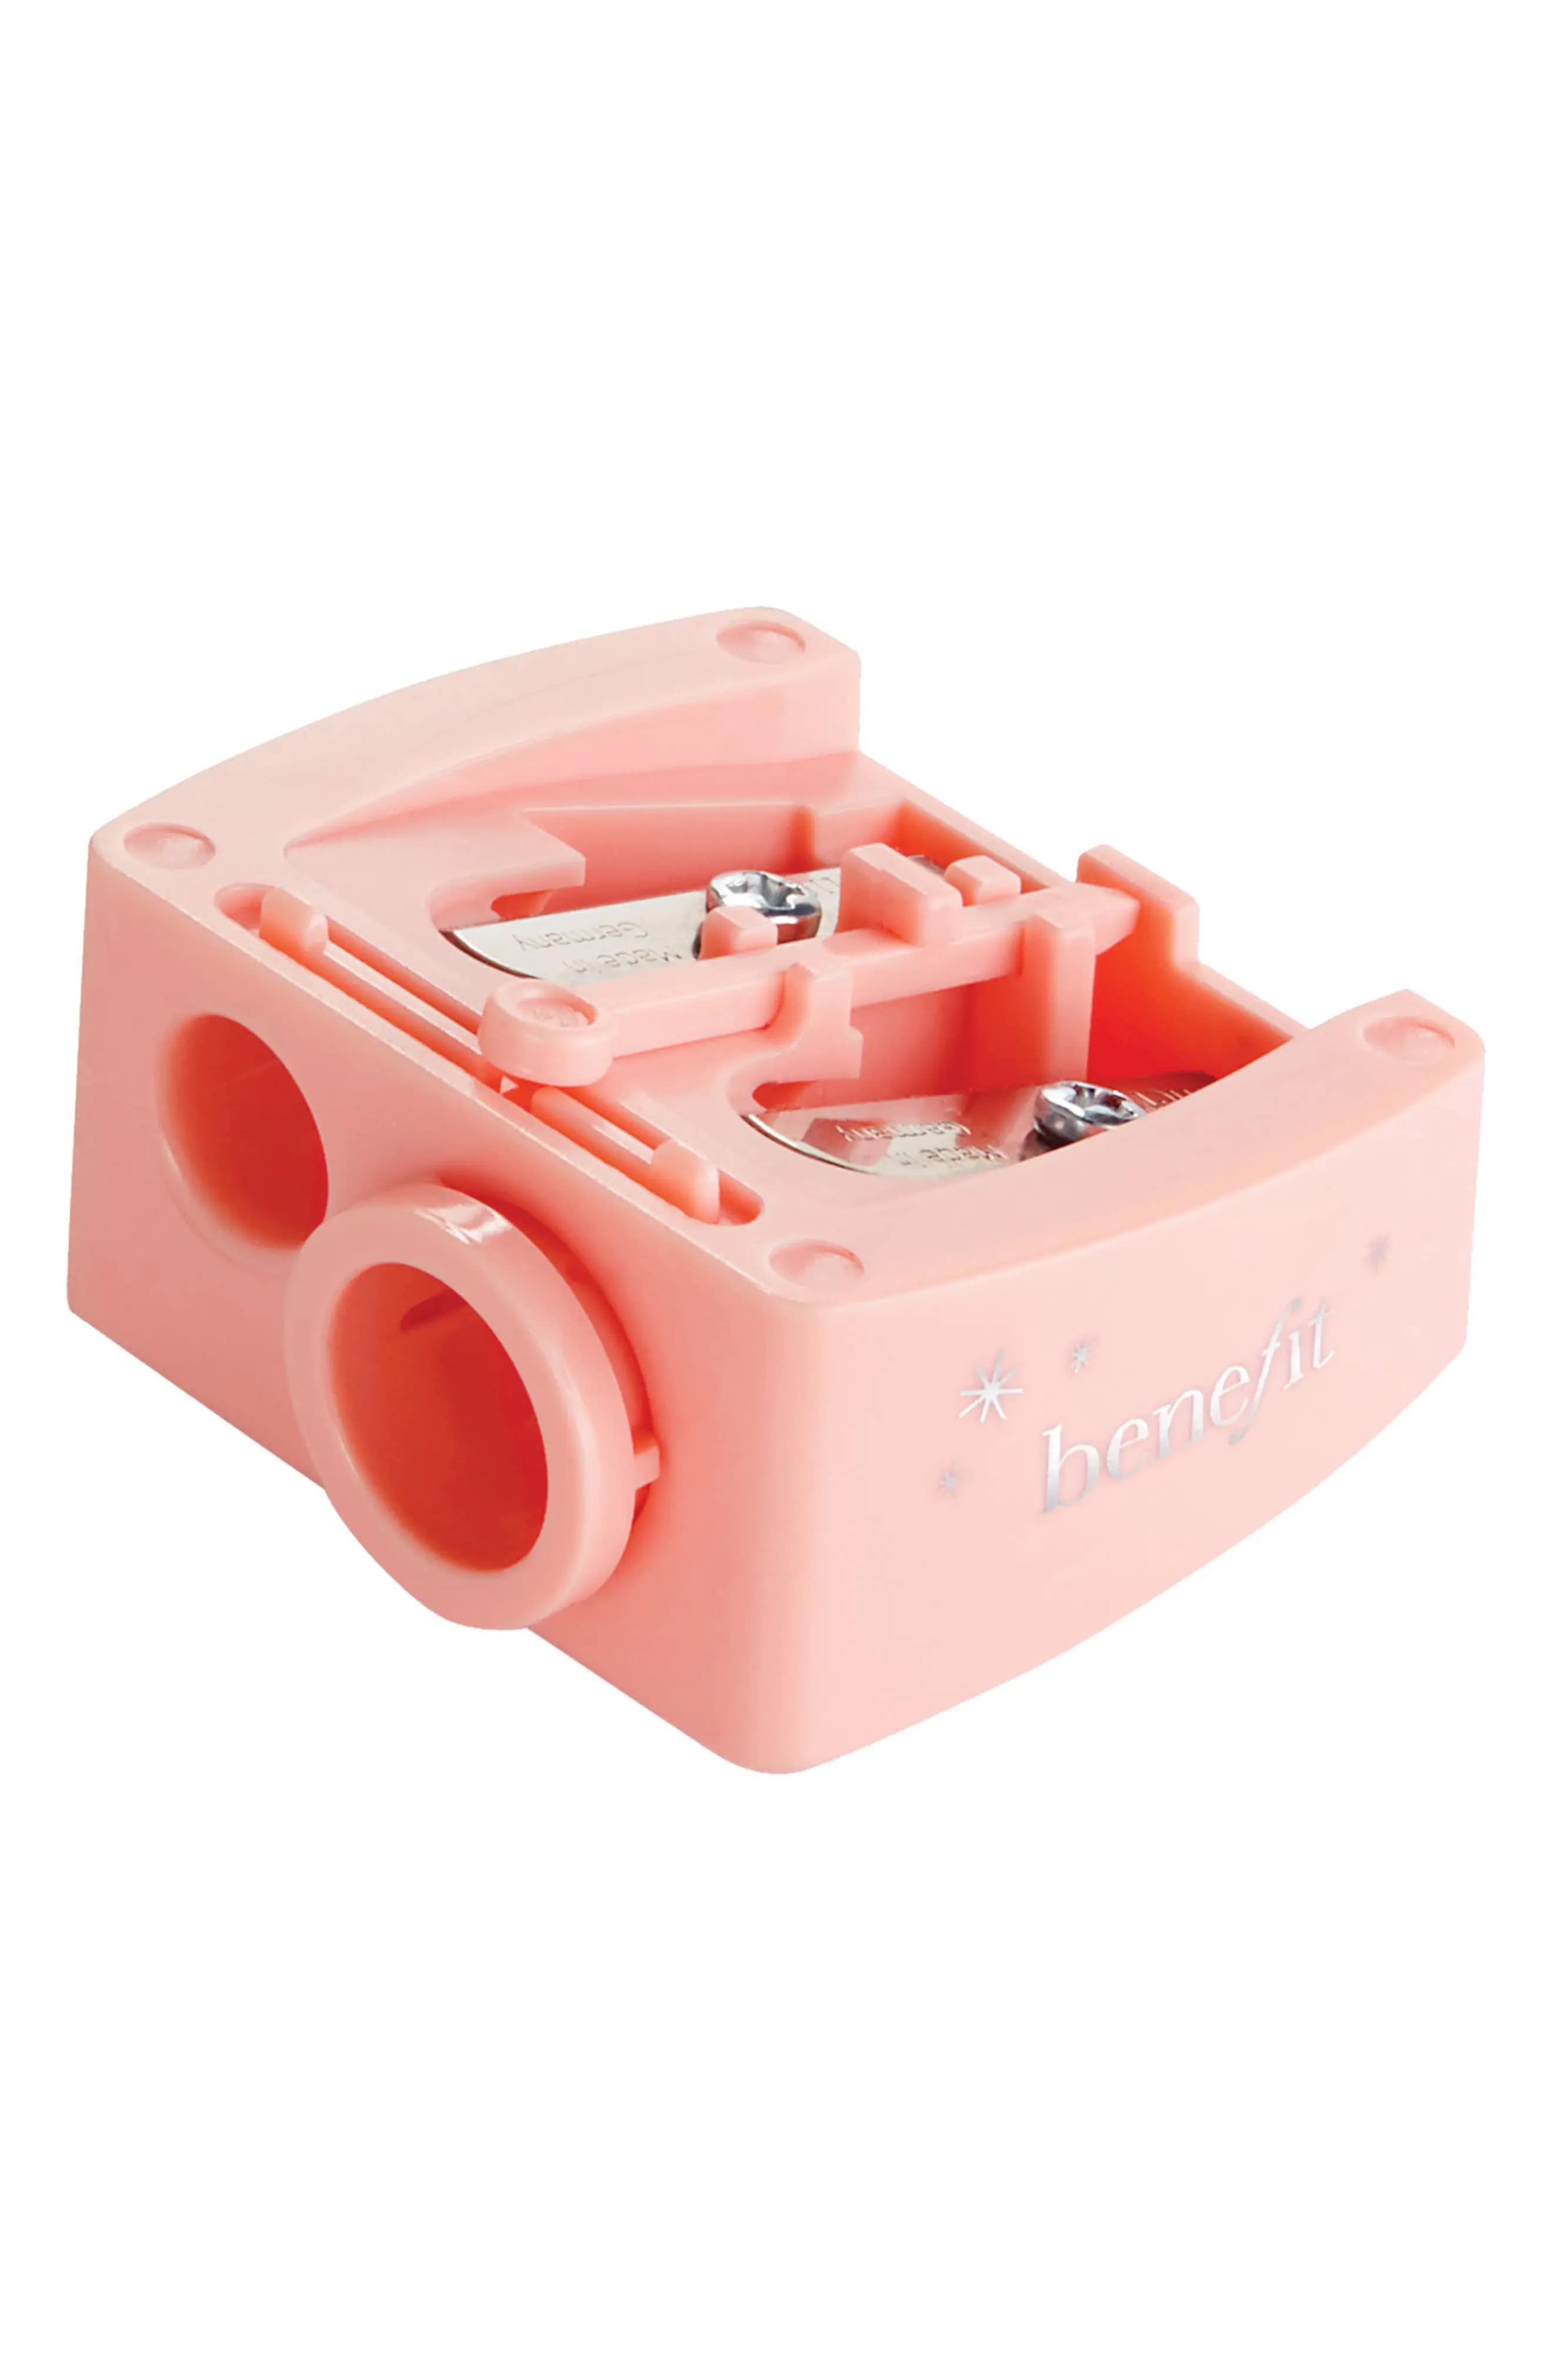 All-Purpose Pencil Sharpener for Kohl and Eyebrow Pencils with Blade-Cleaning tool by Benefit Cosmetics